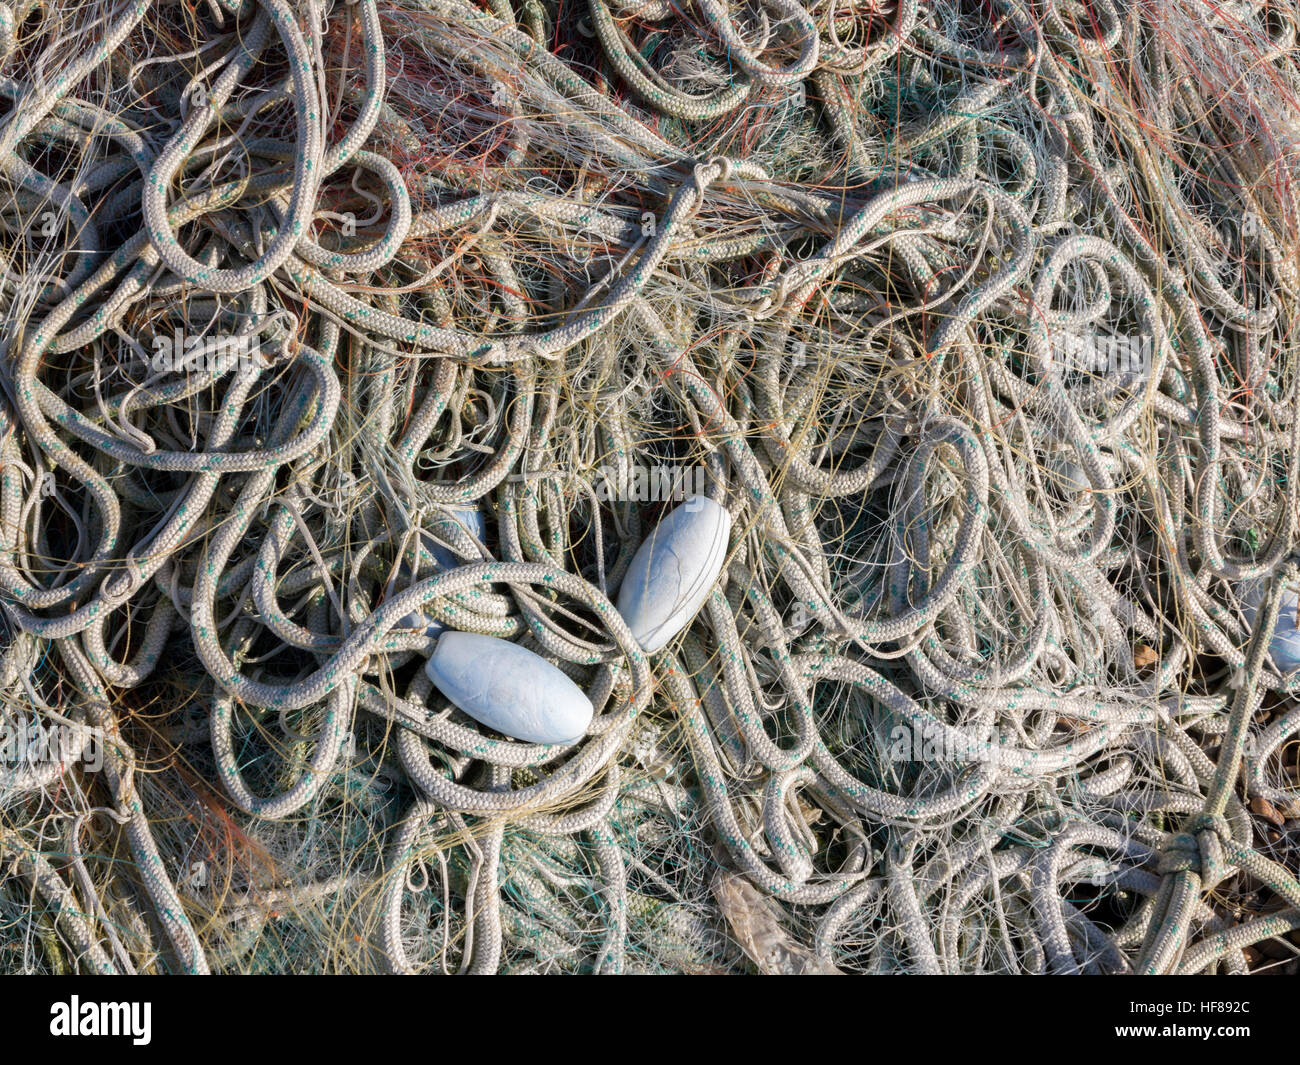 Stock photo of A tangle of fishing nets, lines, hooks and other